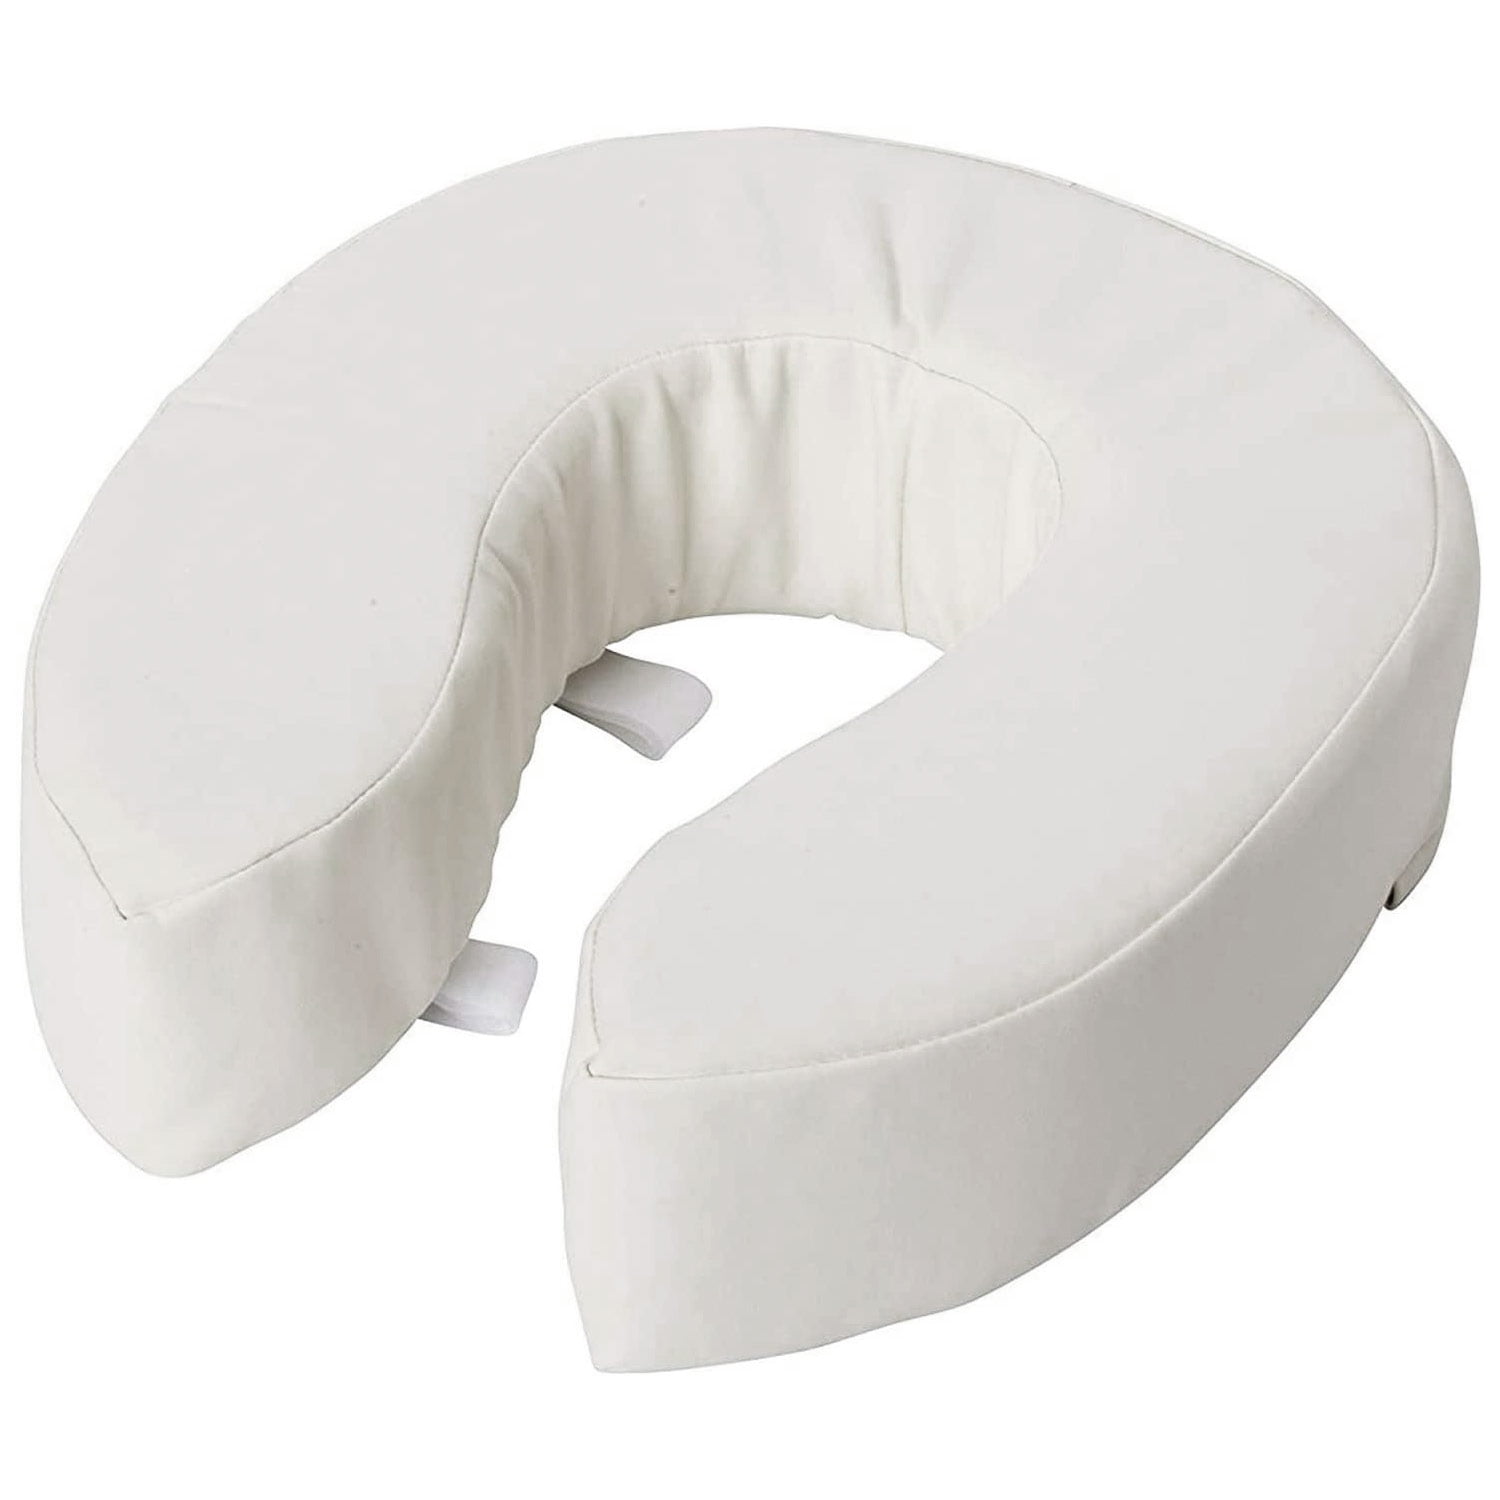 Inflatable Toilet Seat Cushion, Raised Donut Pillow,height Adjustable  Toilet Seat, Pvc Commode Support Cushion For Adults,seniors,elderly,  Disabled,ta